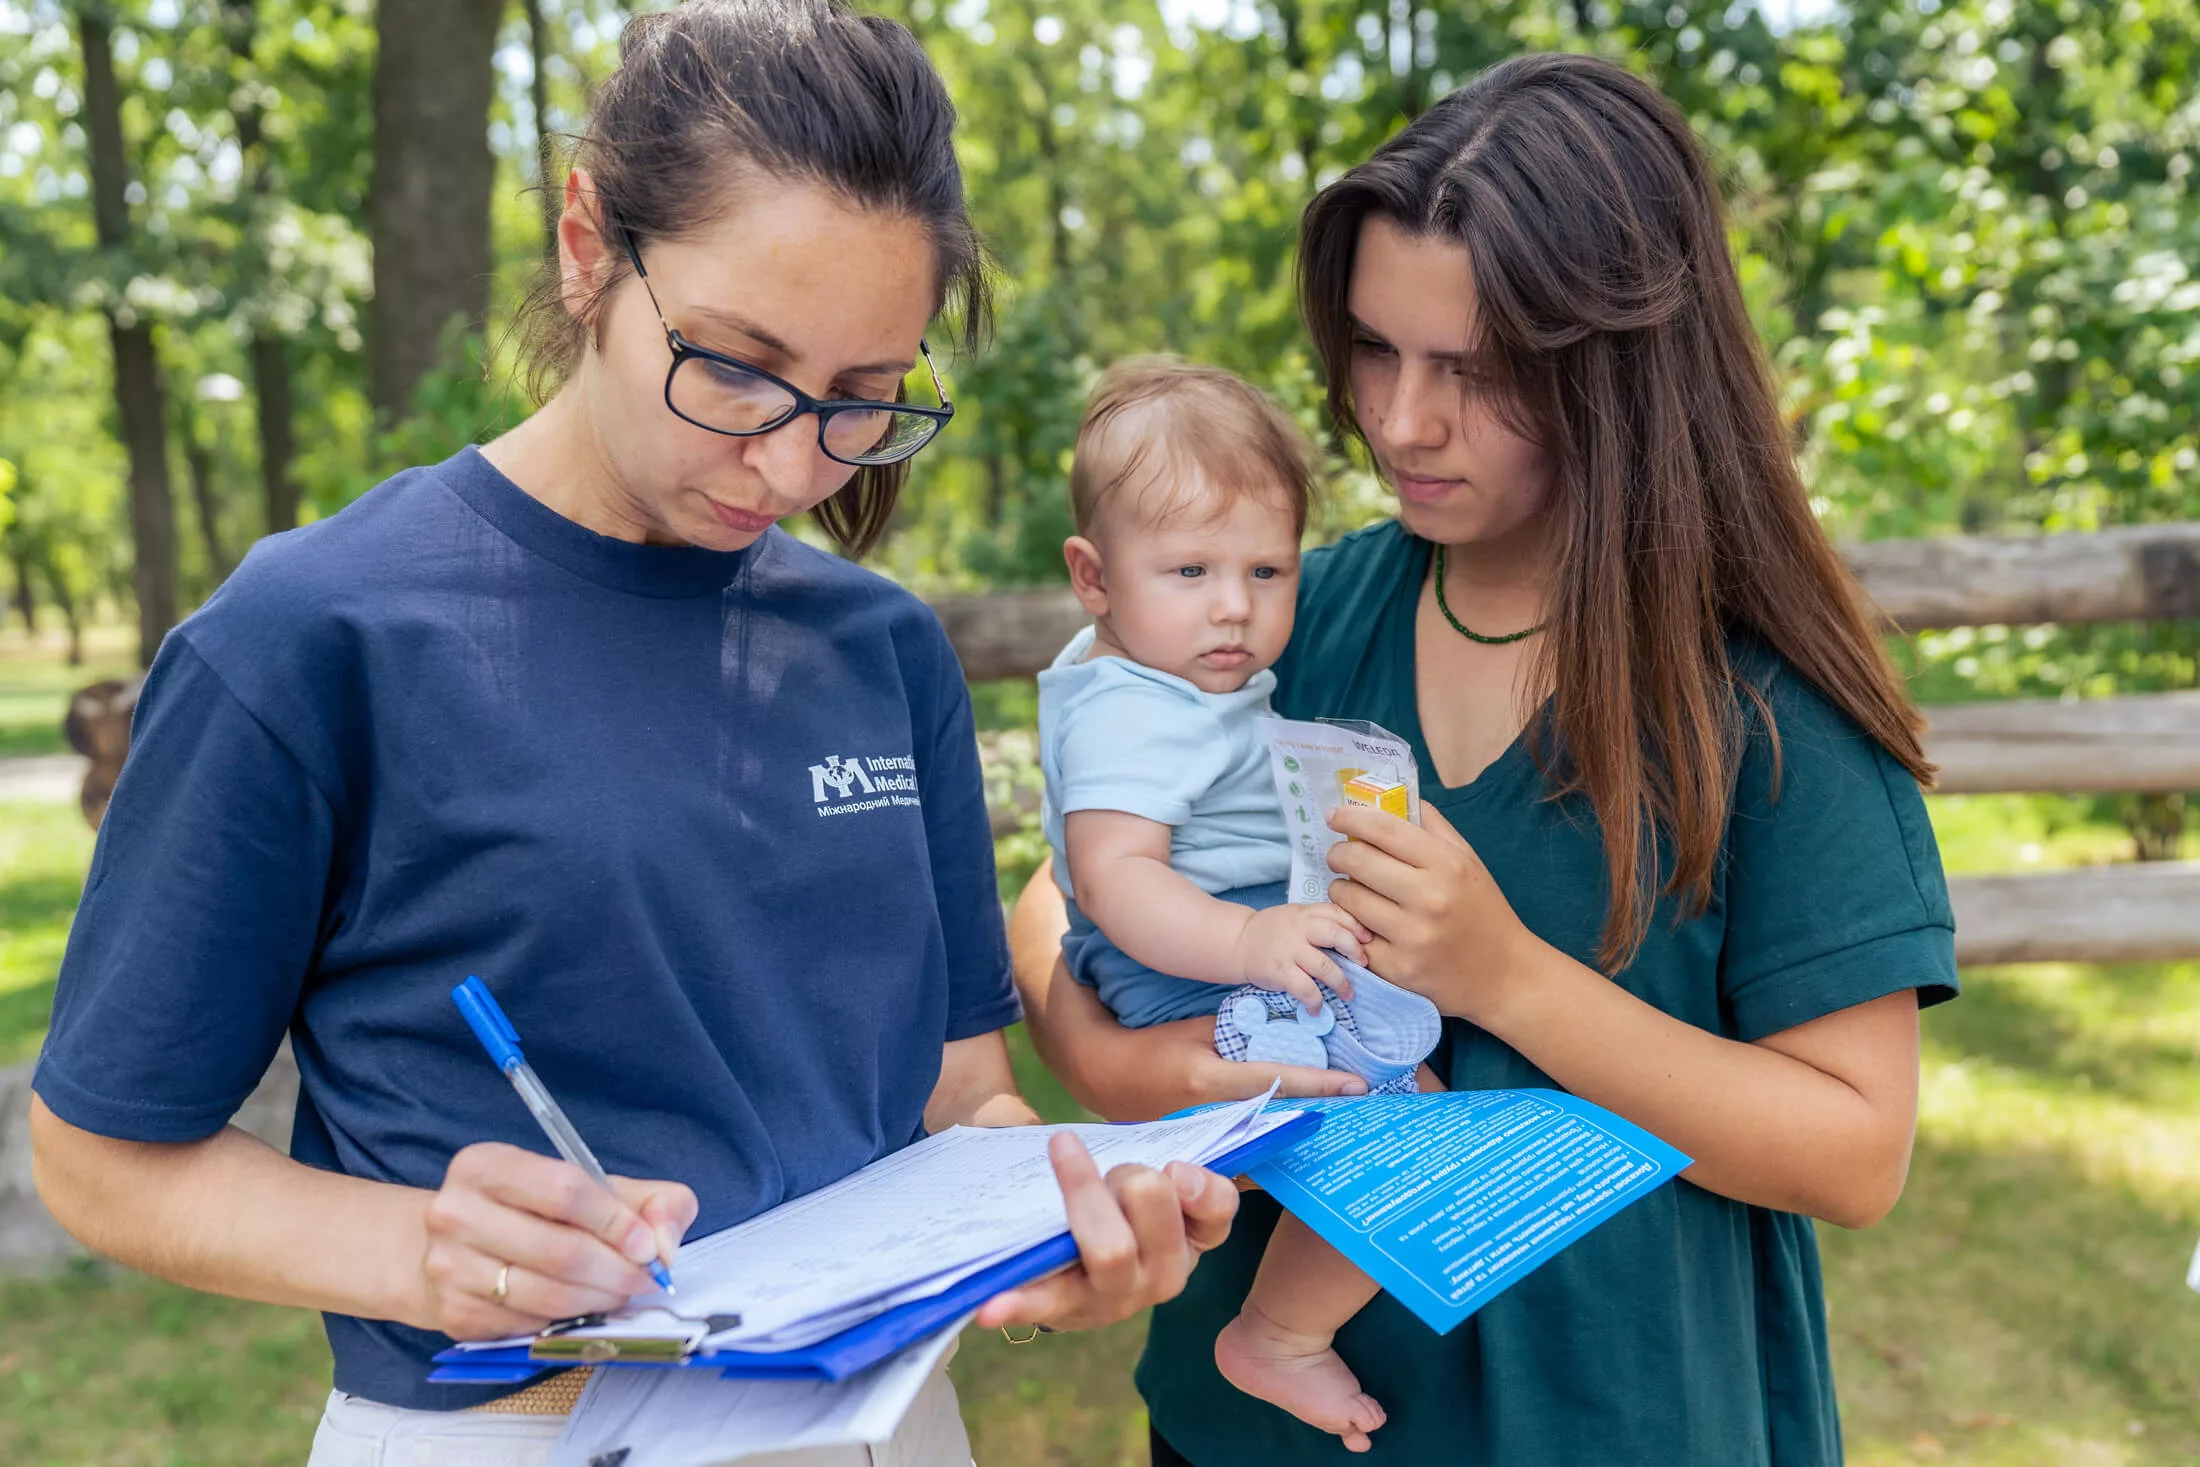 International Medical Corps staff members in Ukraine conduct lectures, gather information and hand out materials at an event for young parents and parents-to-be.